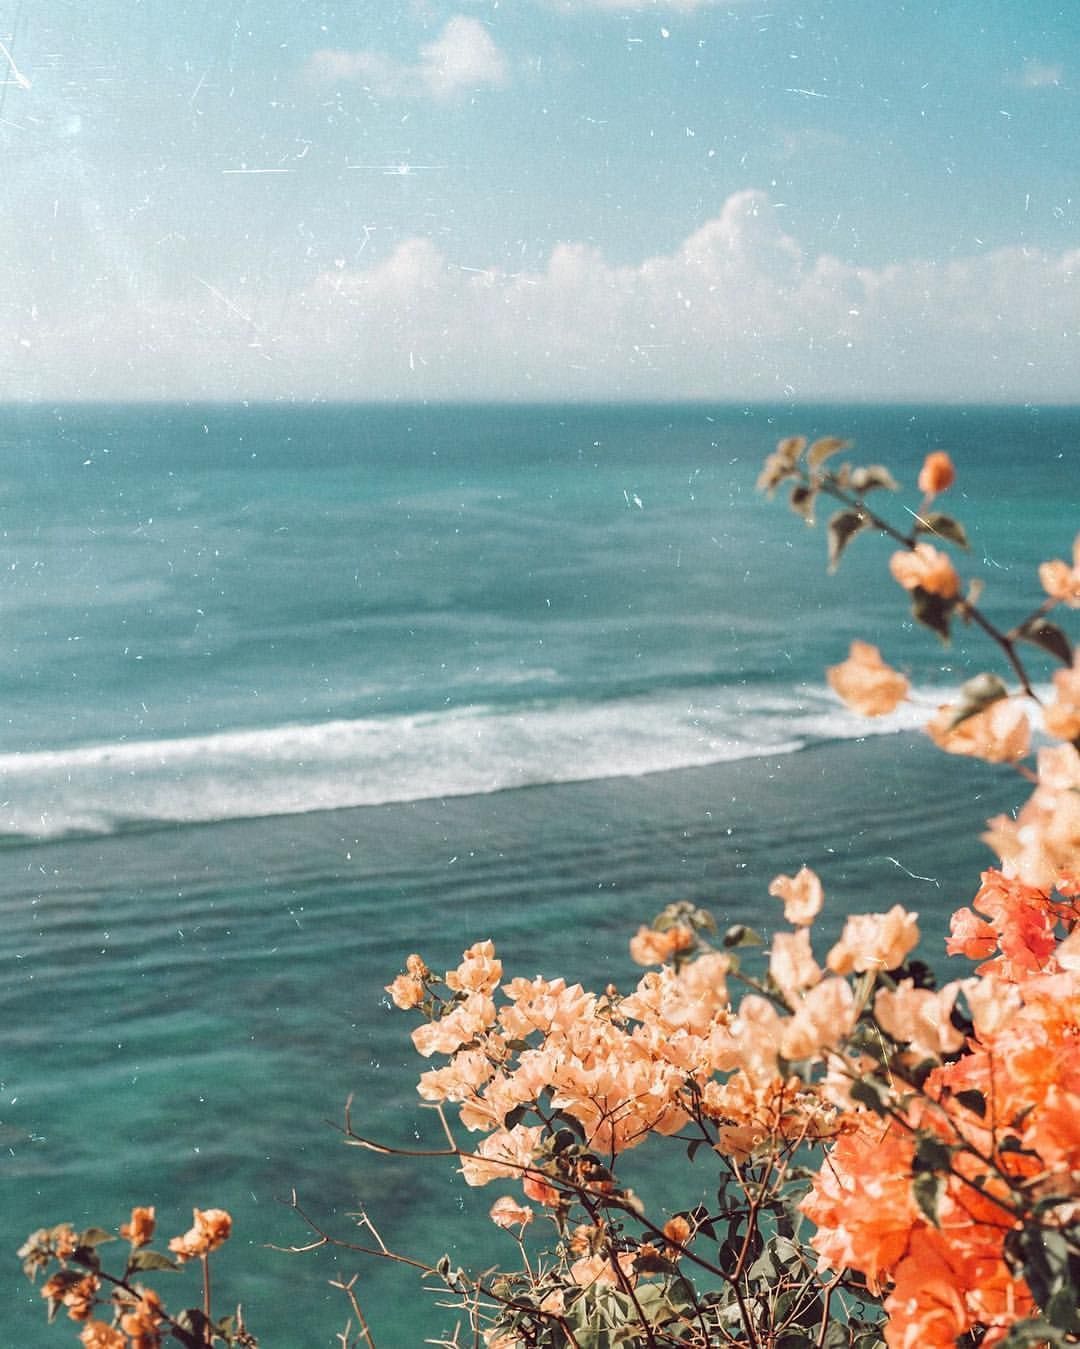 A photo of a beautiful beach with flowers in the foreground. - Nature